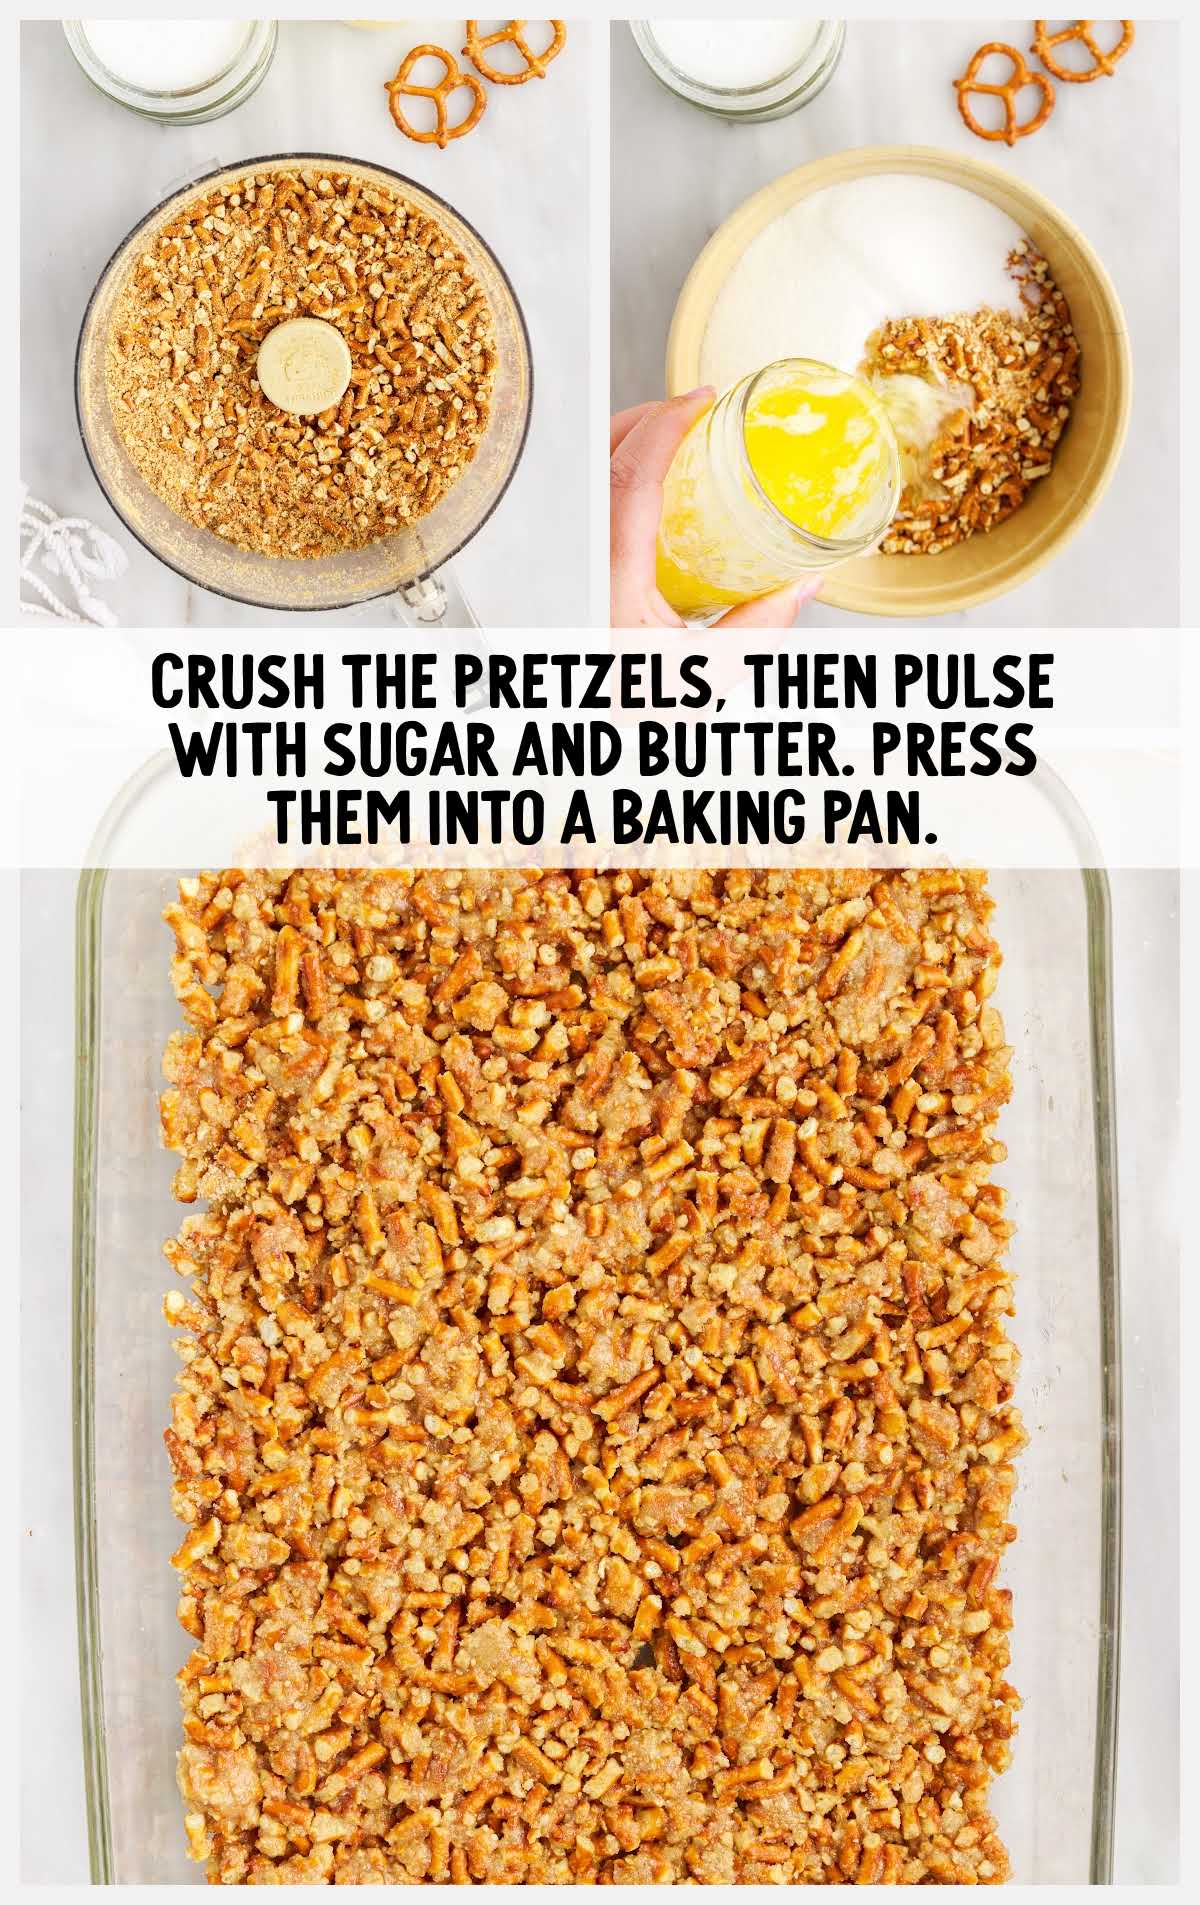 crushed pretzel, sugar and butter combined and pressed into a baking pan